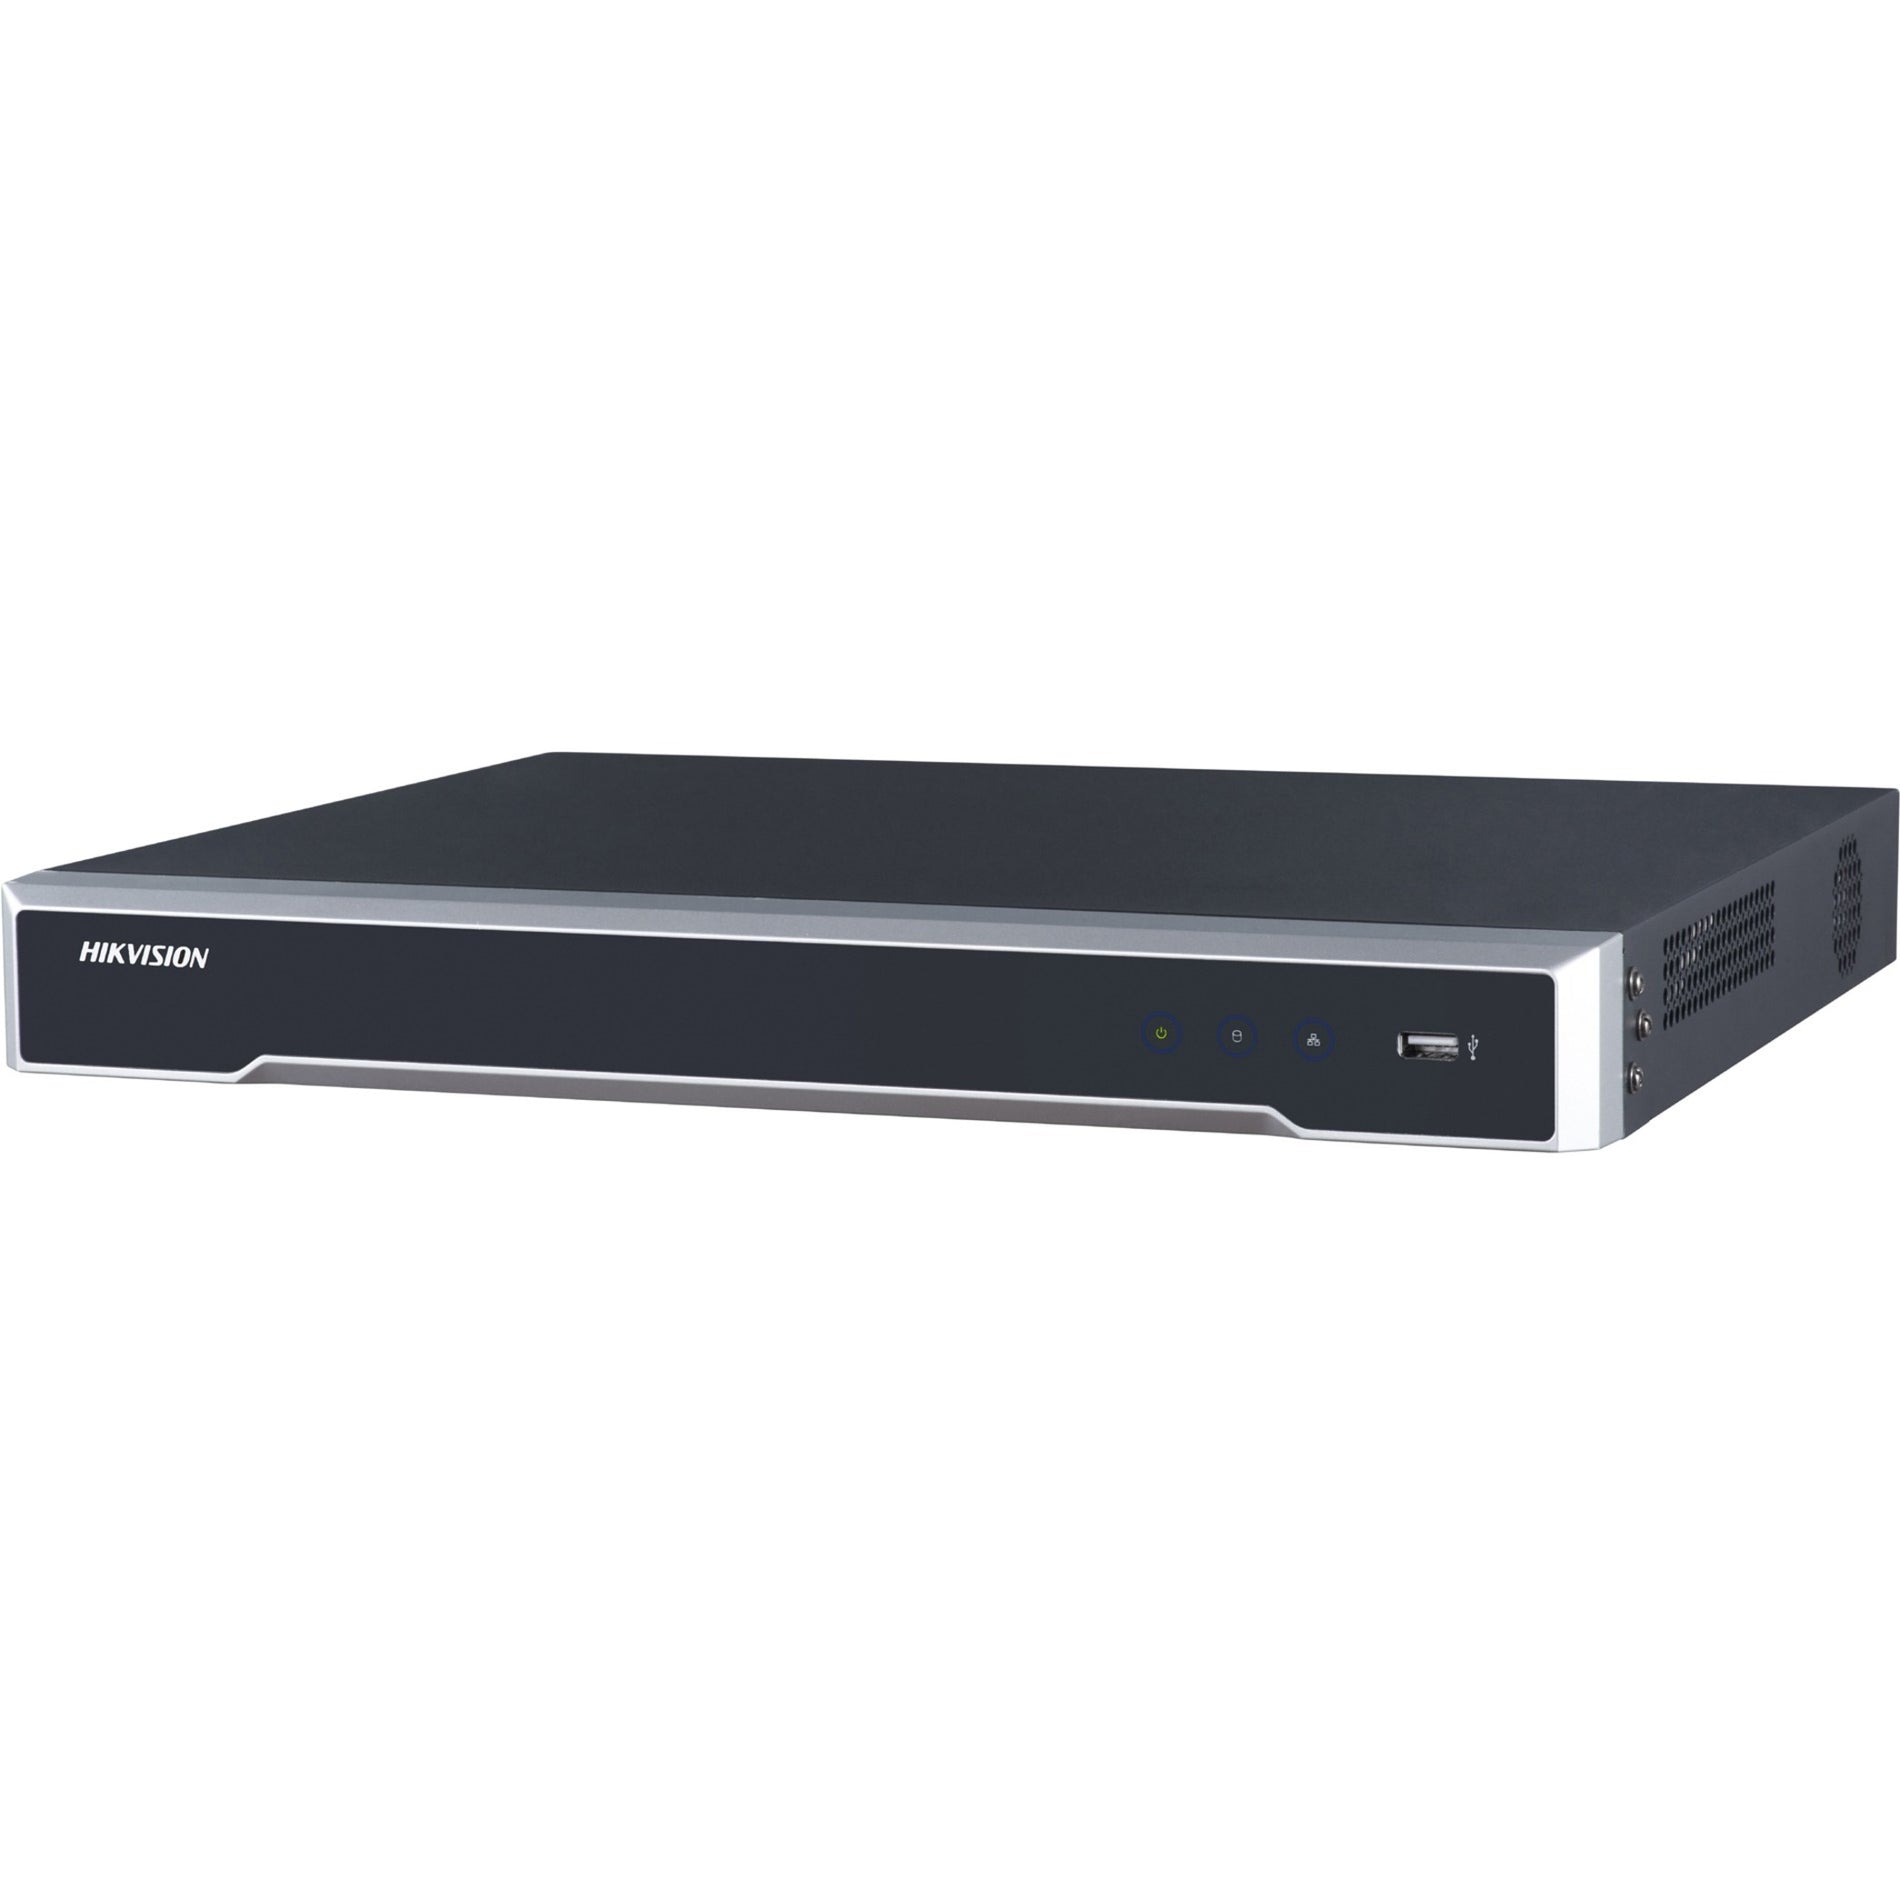 Hikvision DS-7616NI-Q2/16P-8TB DS-7600NI-Q2/P Series NVR, 16 Channels, 8 TB HDD, 8MP, H.265+, HDMI, TAA Compliant